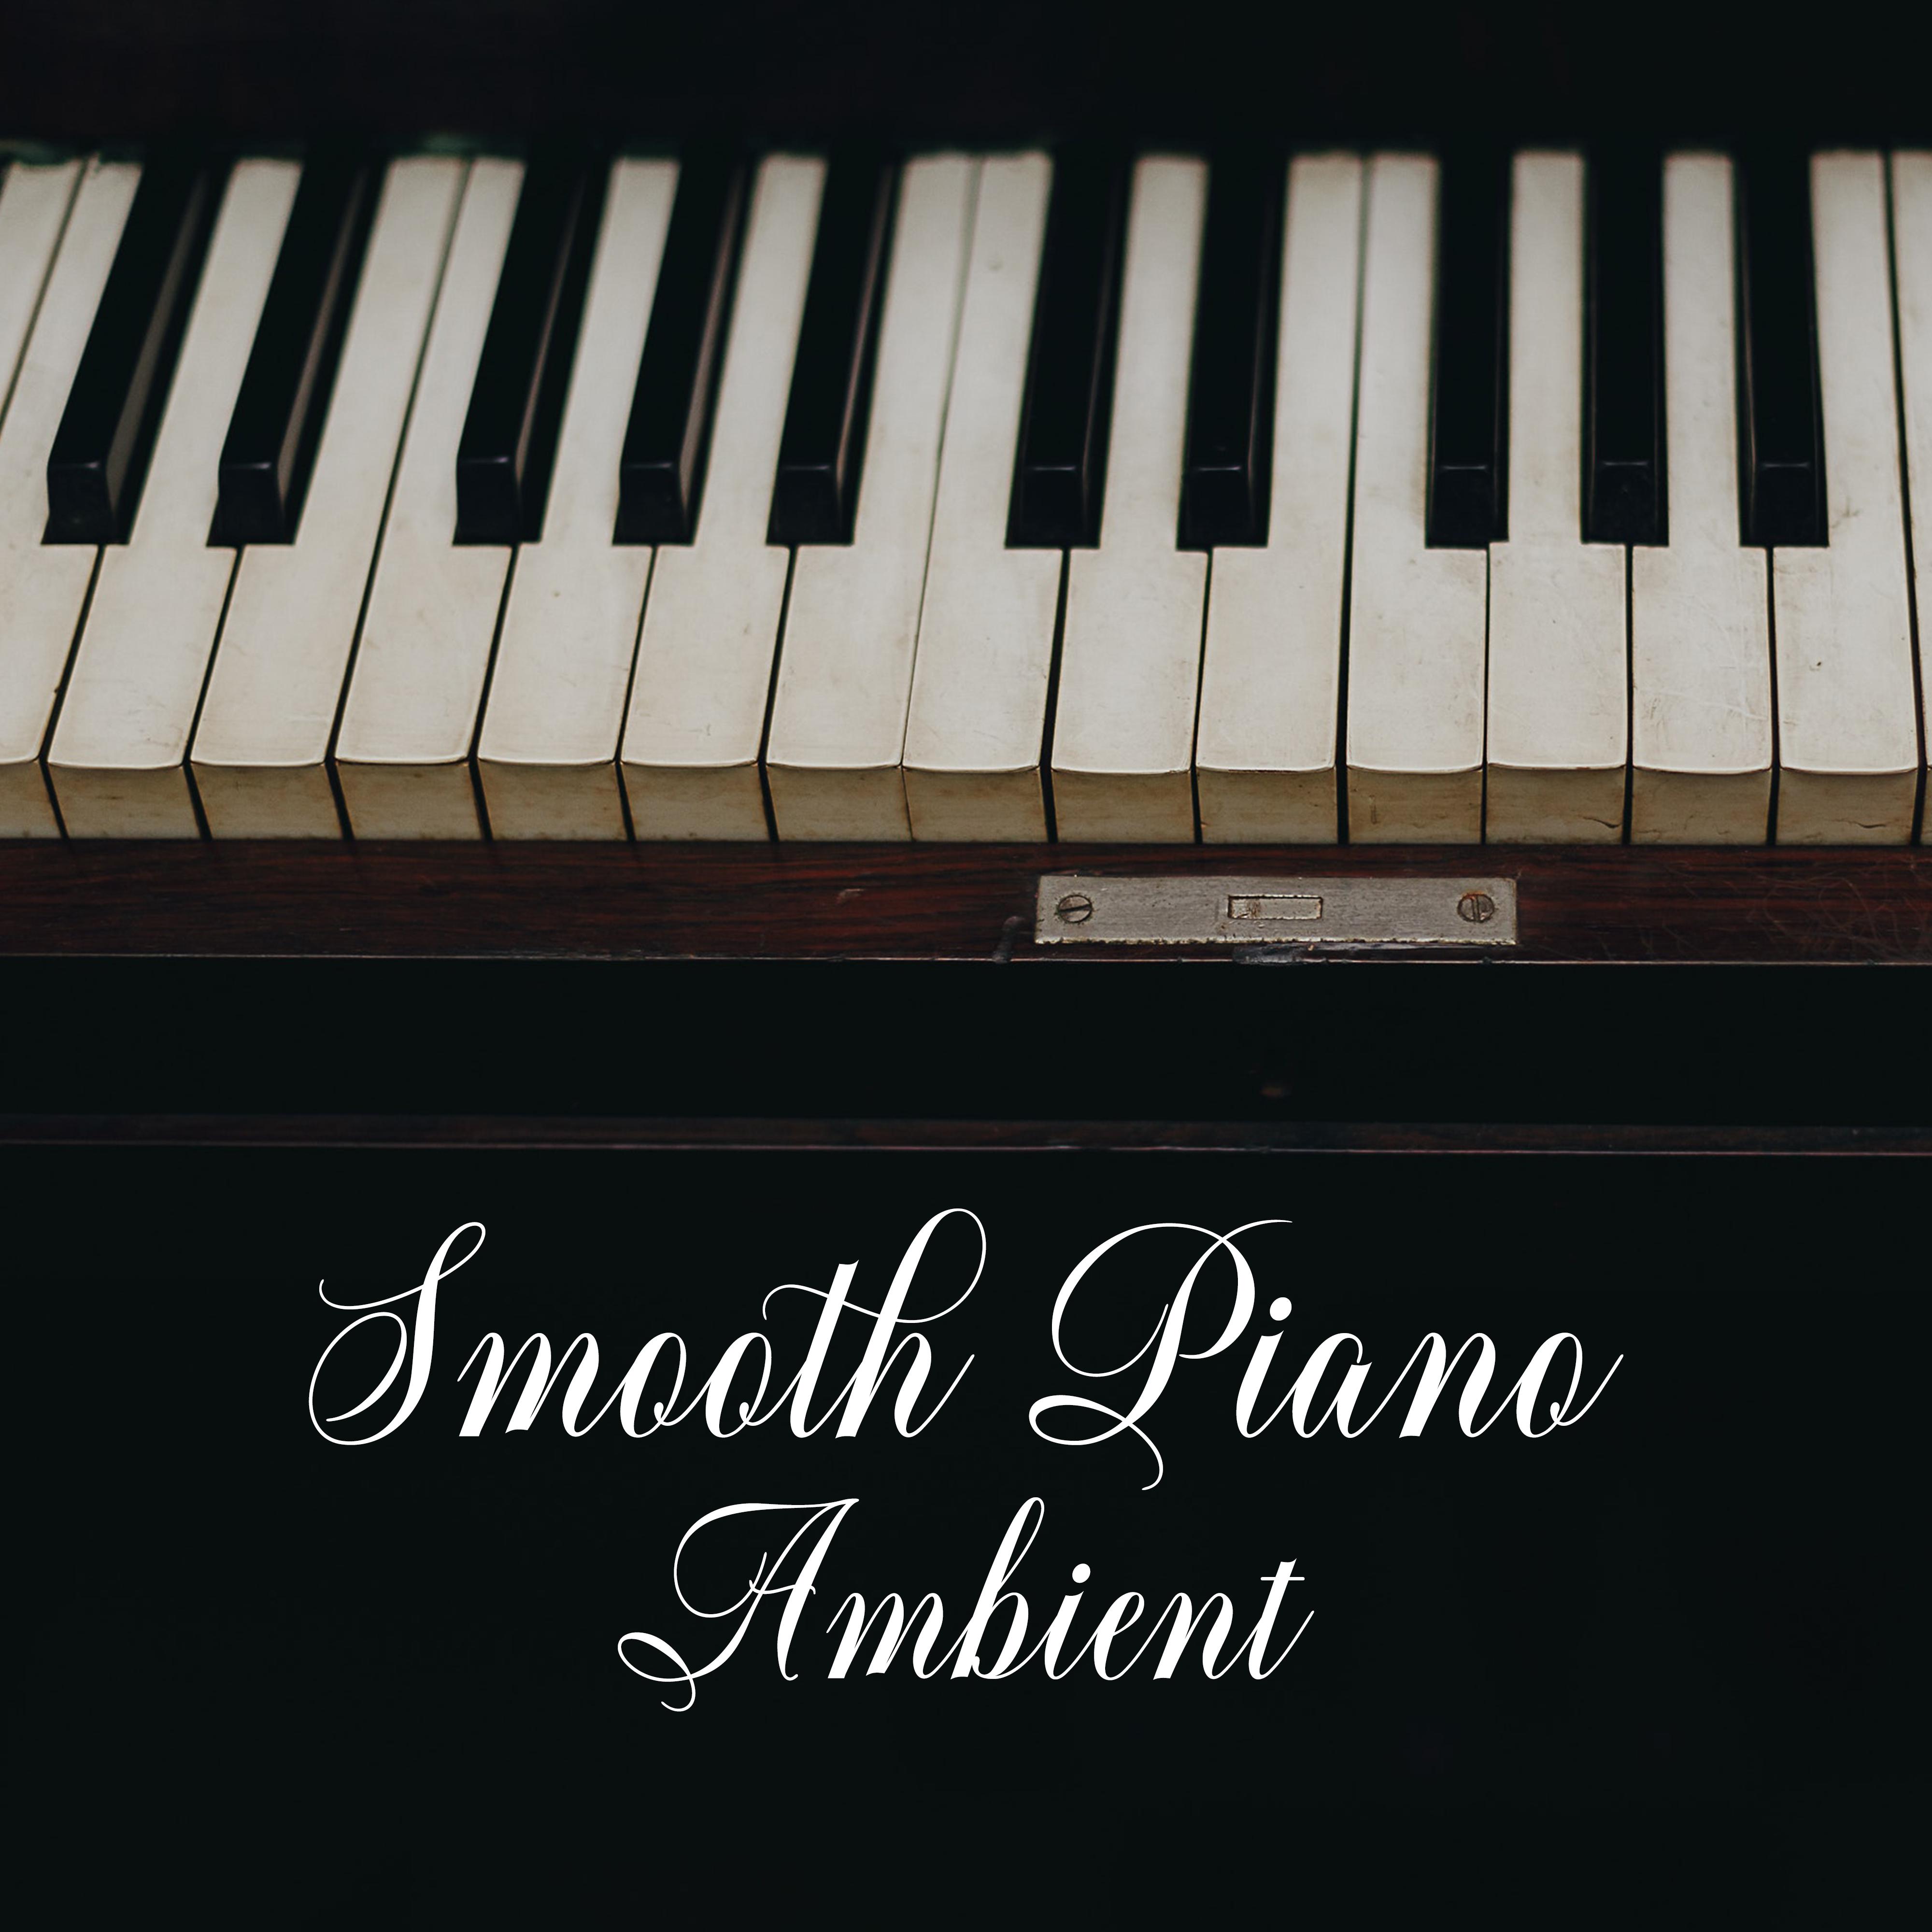 Smooth Piano Ambient: Instrumental Jazz Music Ambient 2019, Piano Relaxation